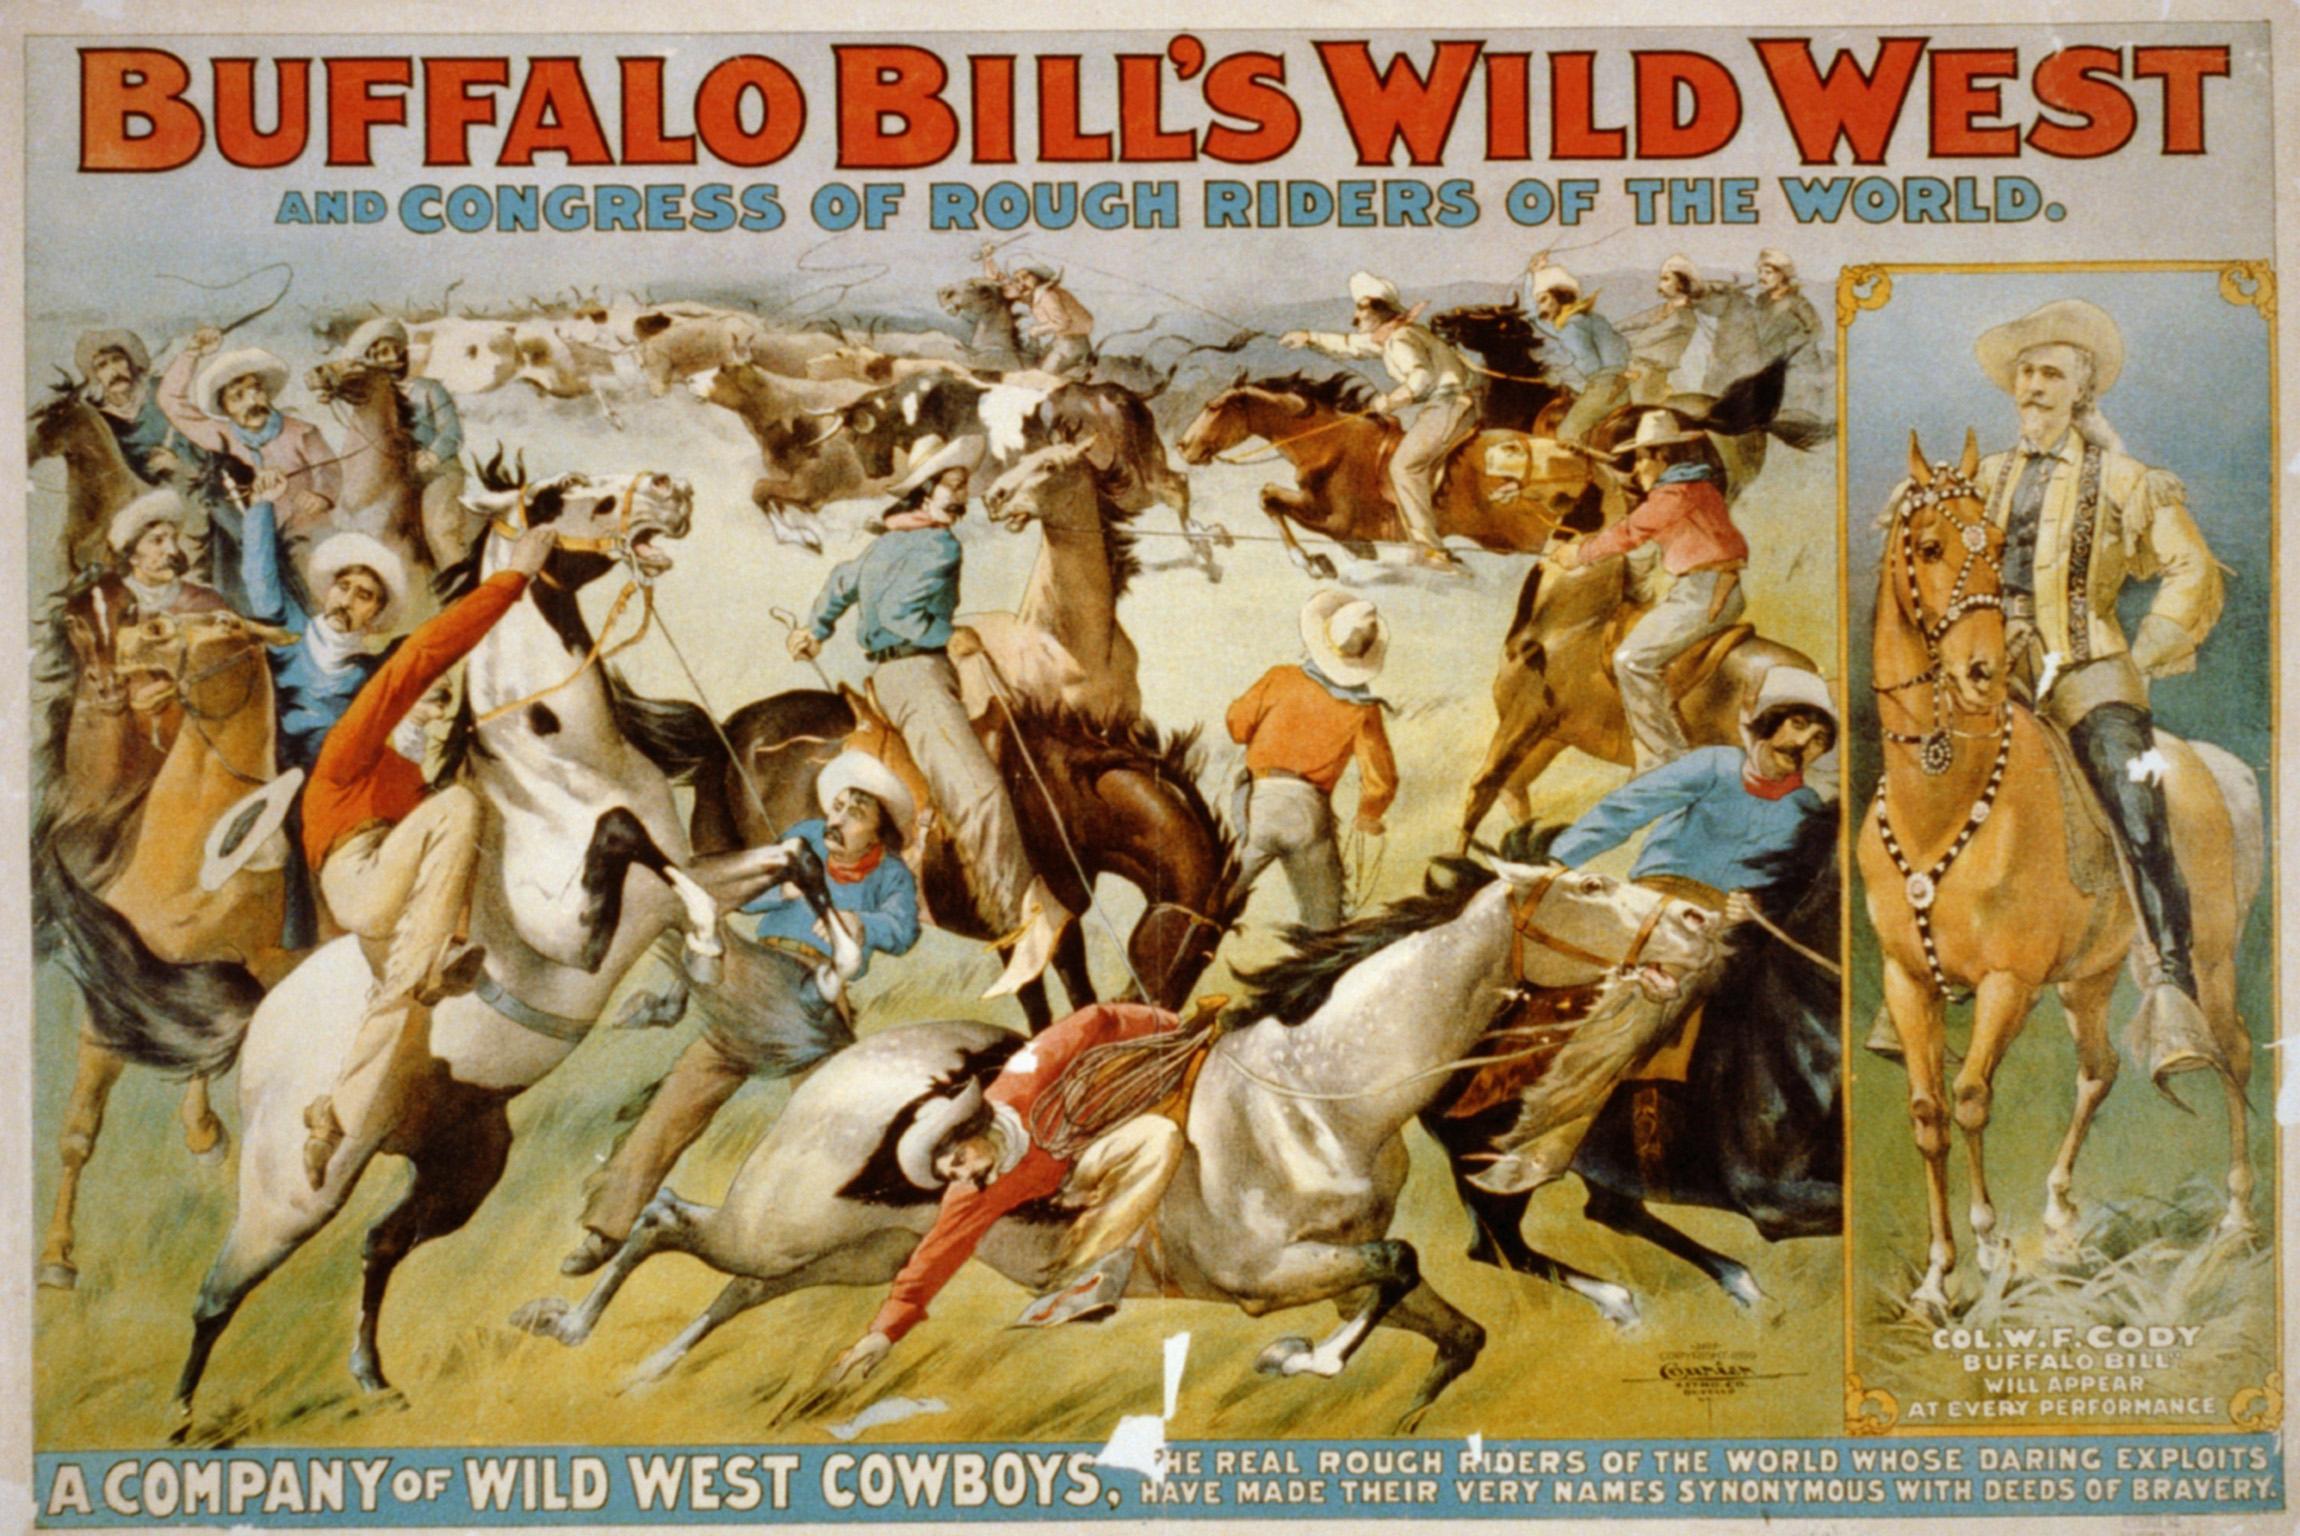 &#13;
Circus posters like this one lended to the show’s portrayal of a wild western frontier &#13;